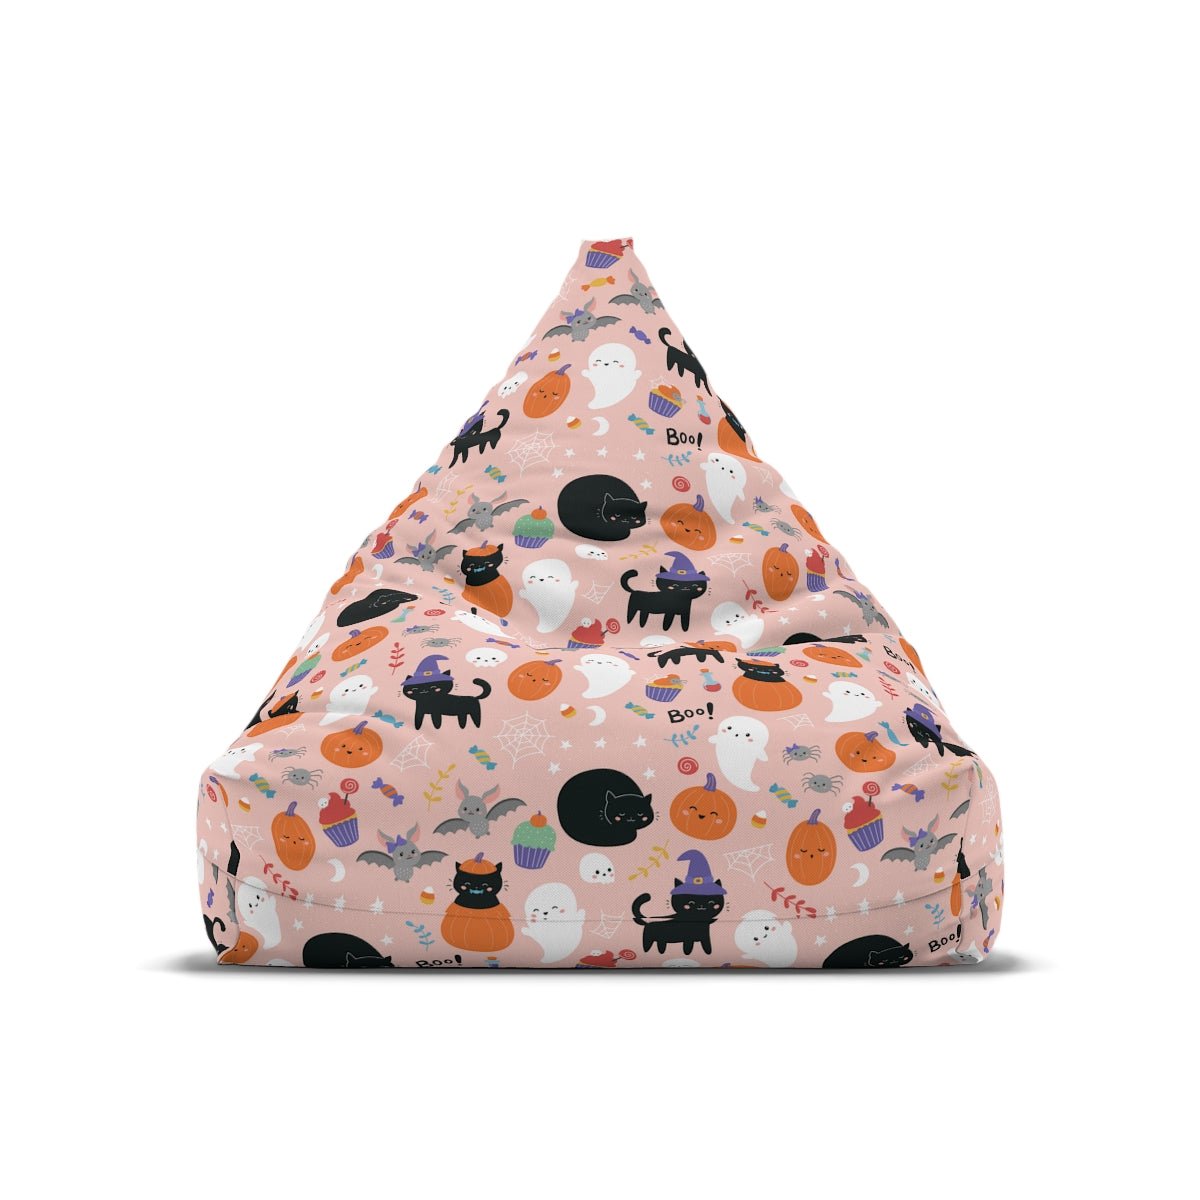 Halloween Ghosts and Black Cats Bean Bag Chair Cover - Puffin Lime